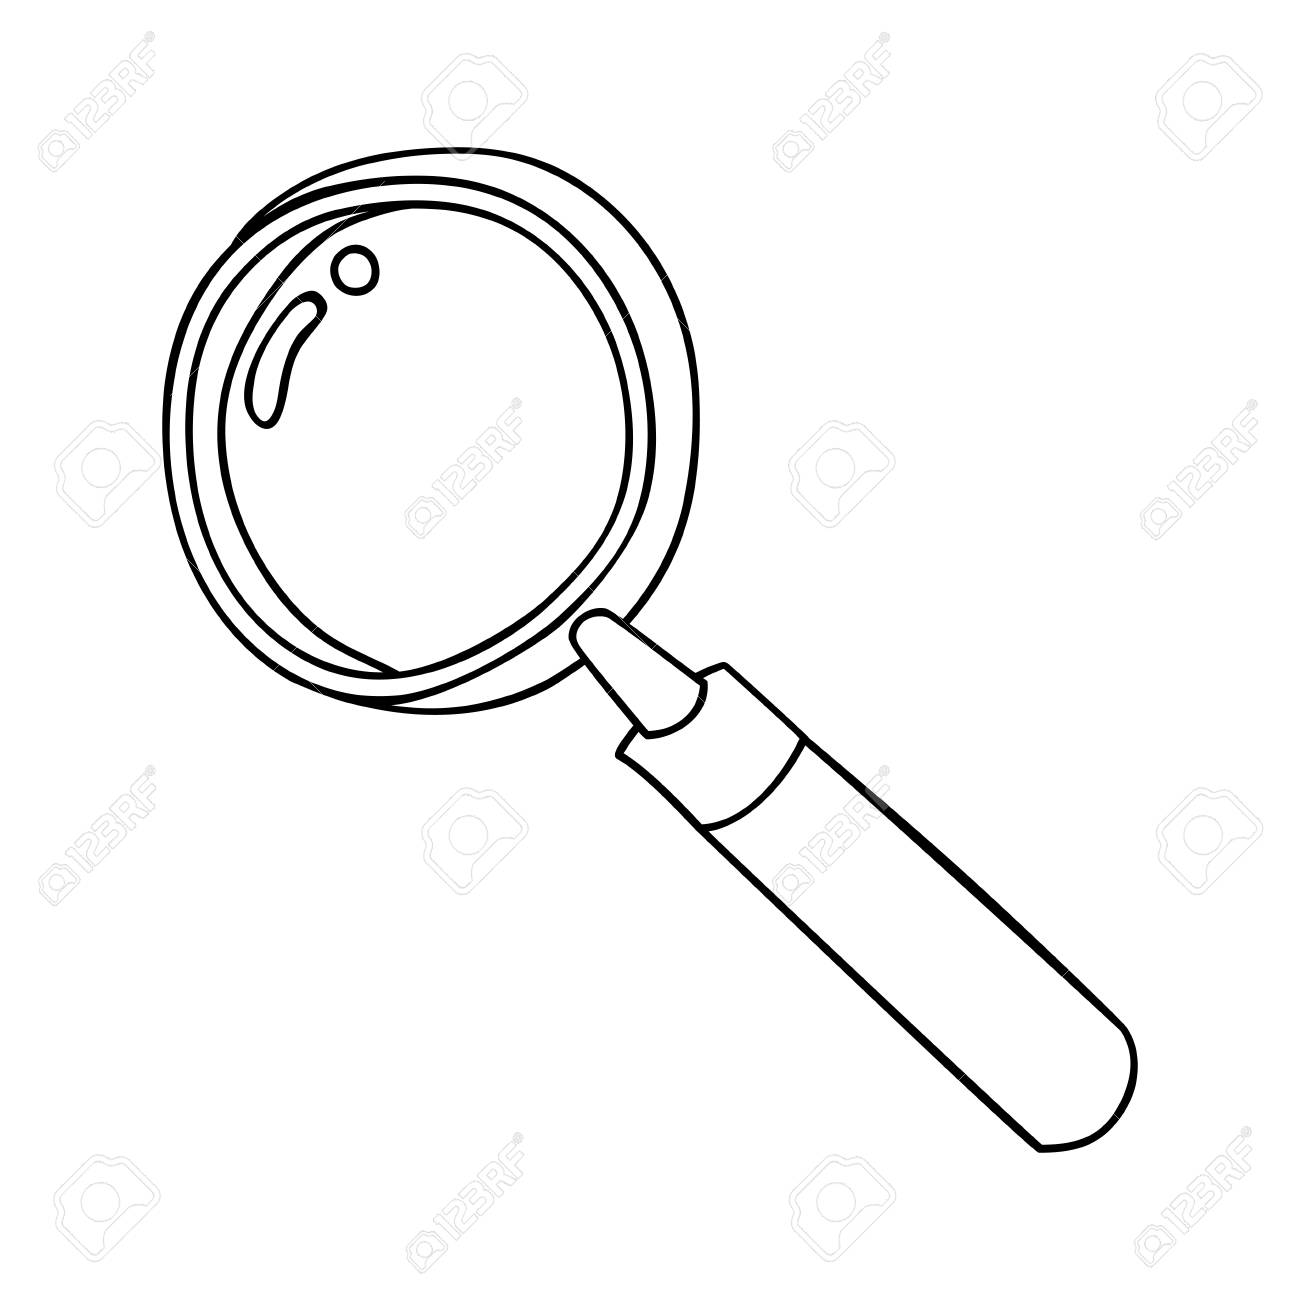 Magnifying glass ,isolated black and white flat icon design.